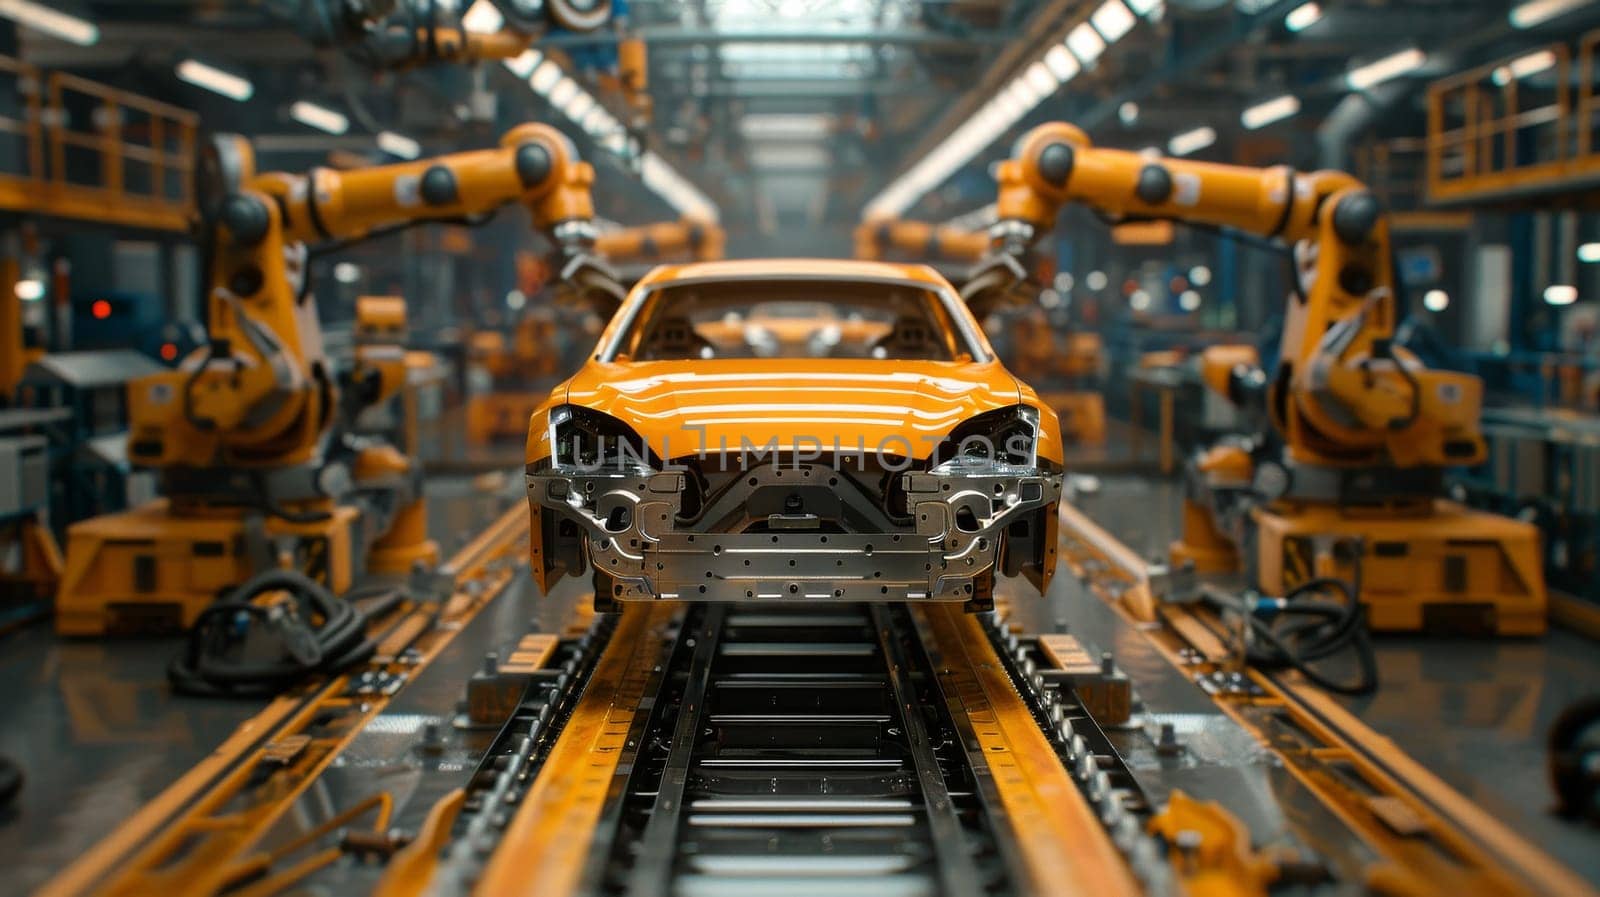 A car is being built in a factory with many robots working on it. The car is yellow and has a shiny finish. The robots are moving around the car, putting it together piece by piece